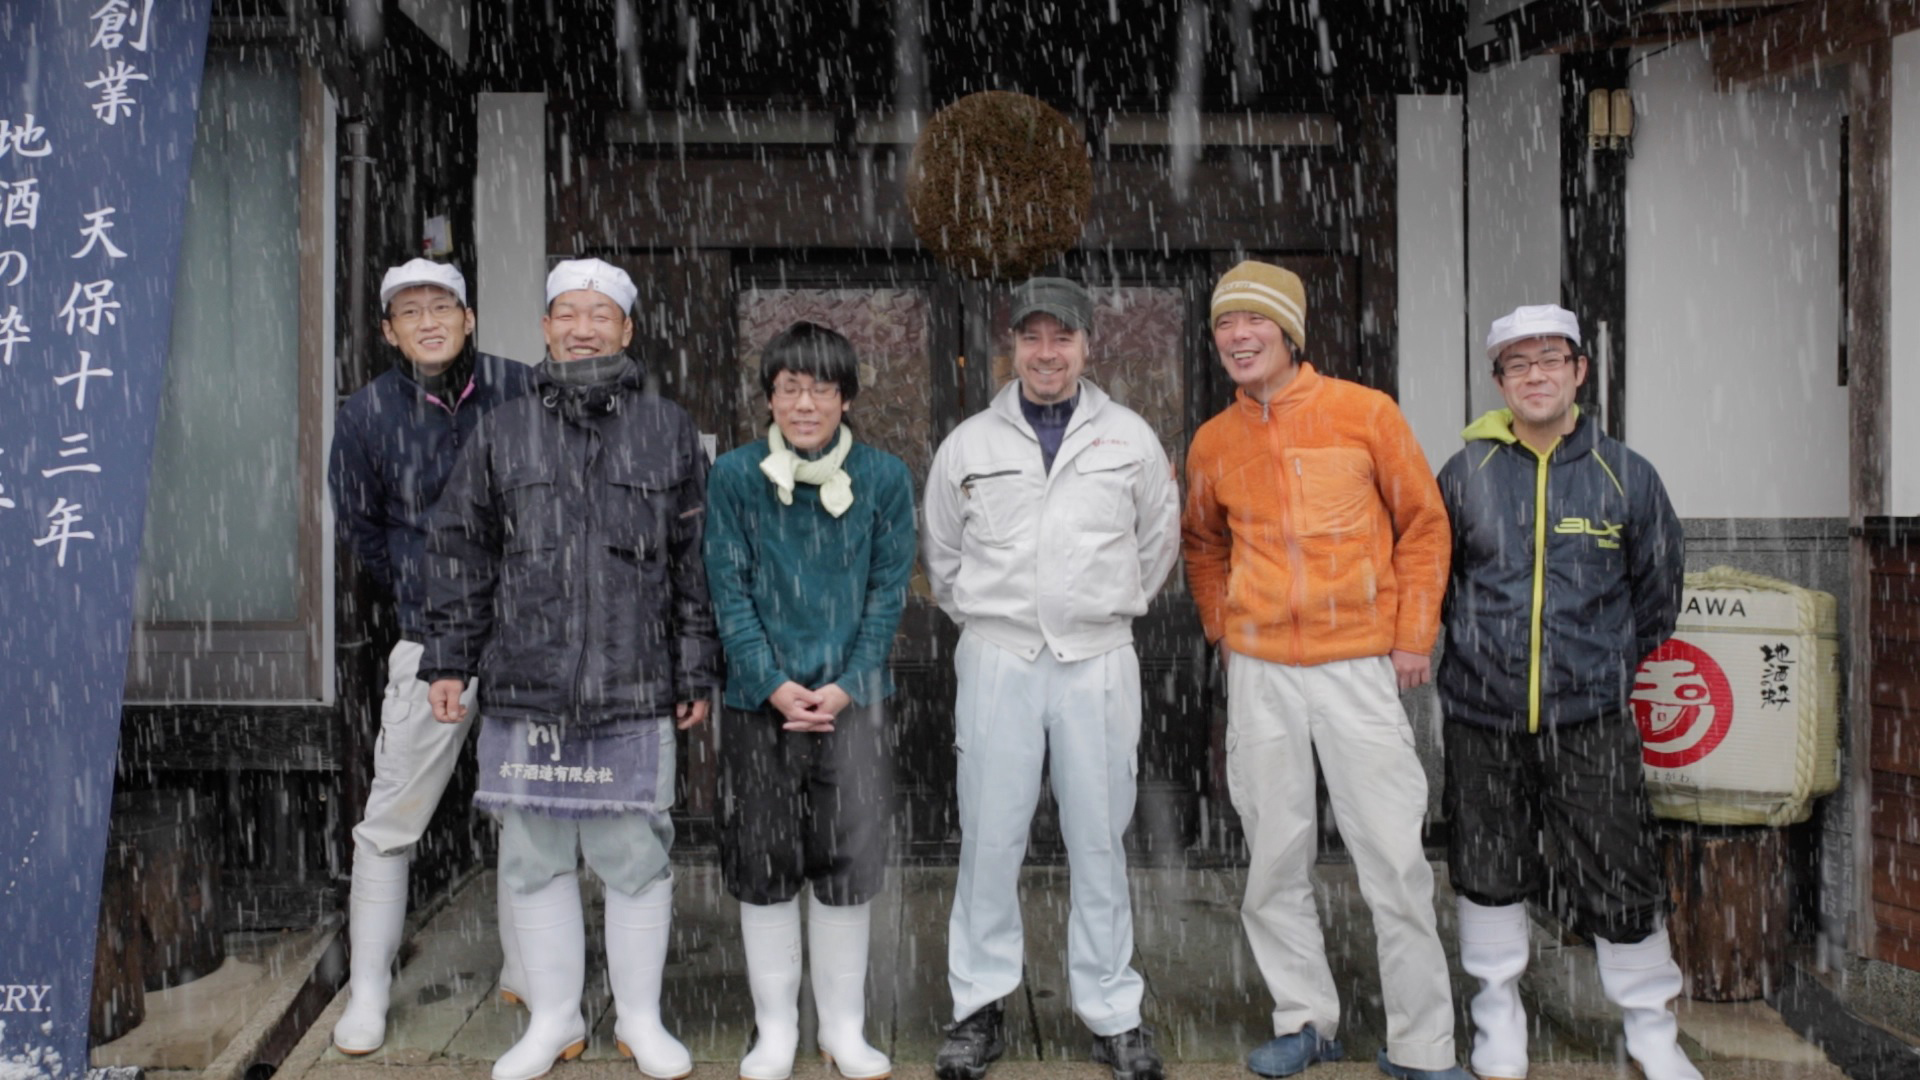 Ready for a brew: Philip Harper (center) and other members of Kinoshita Brewery in Kyoto. | &#169; 2015 WAGAMAMA MEDIA LLC.